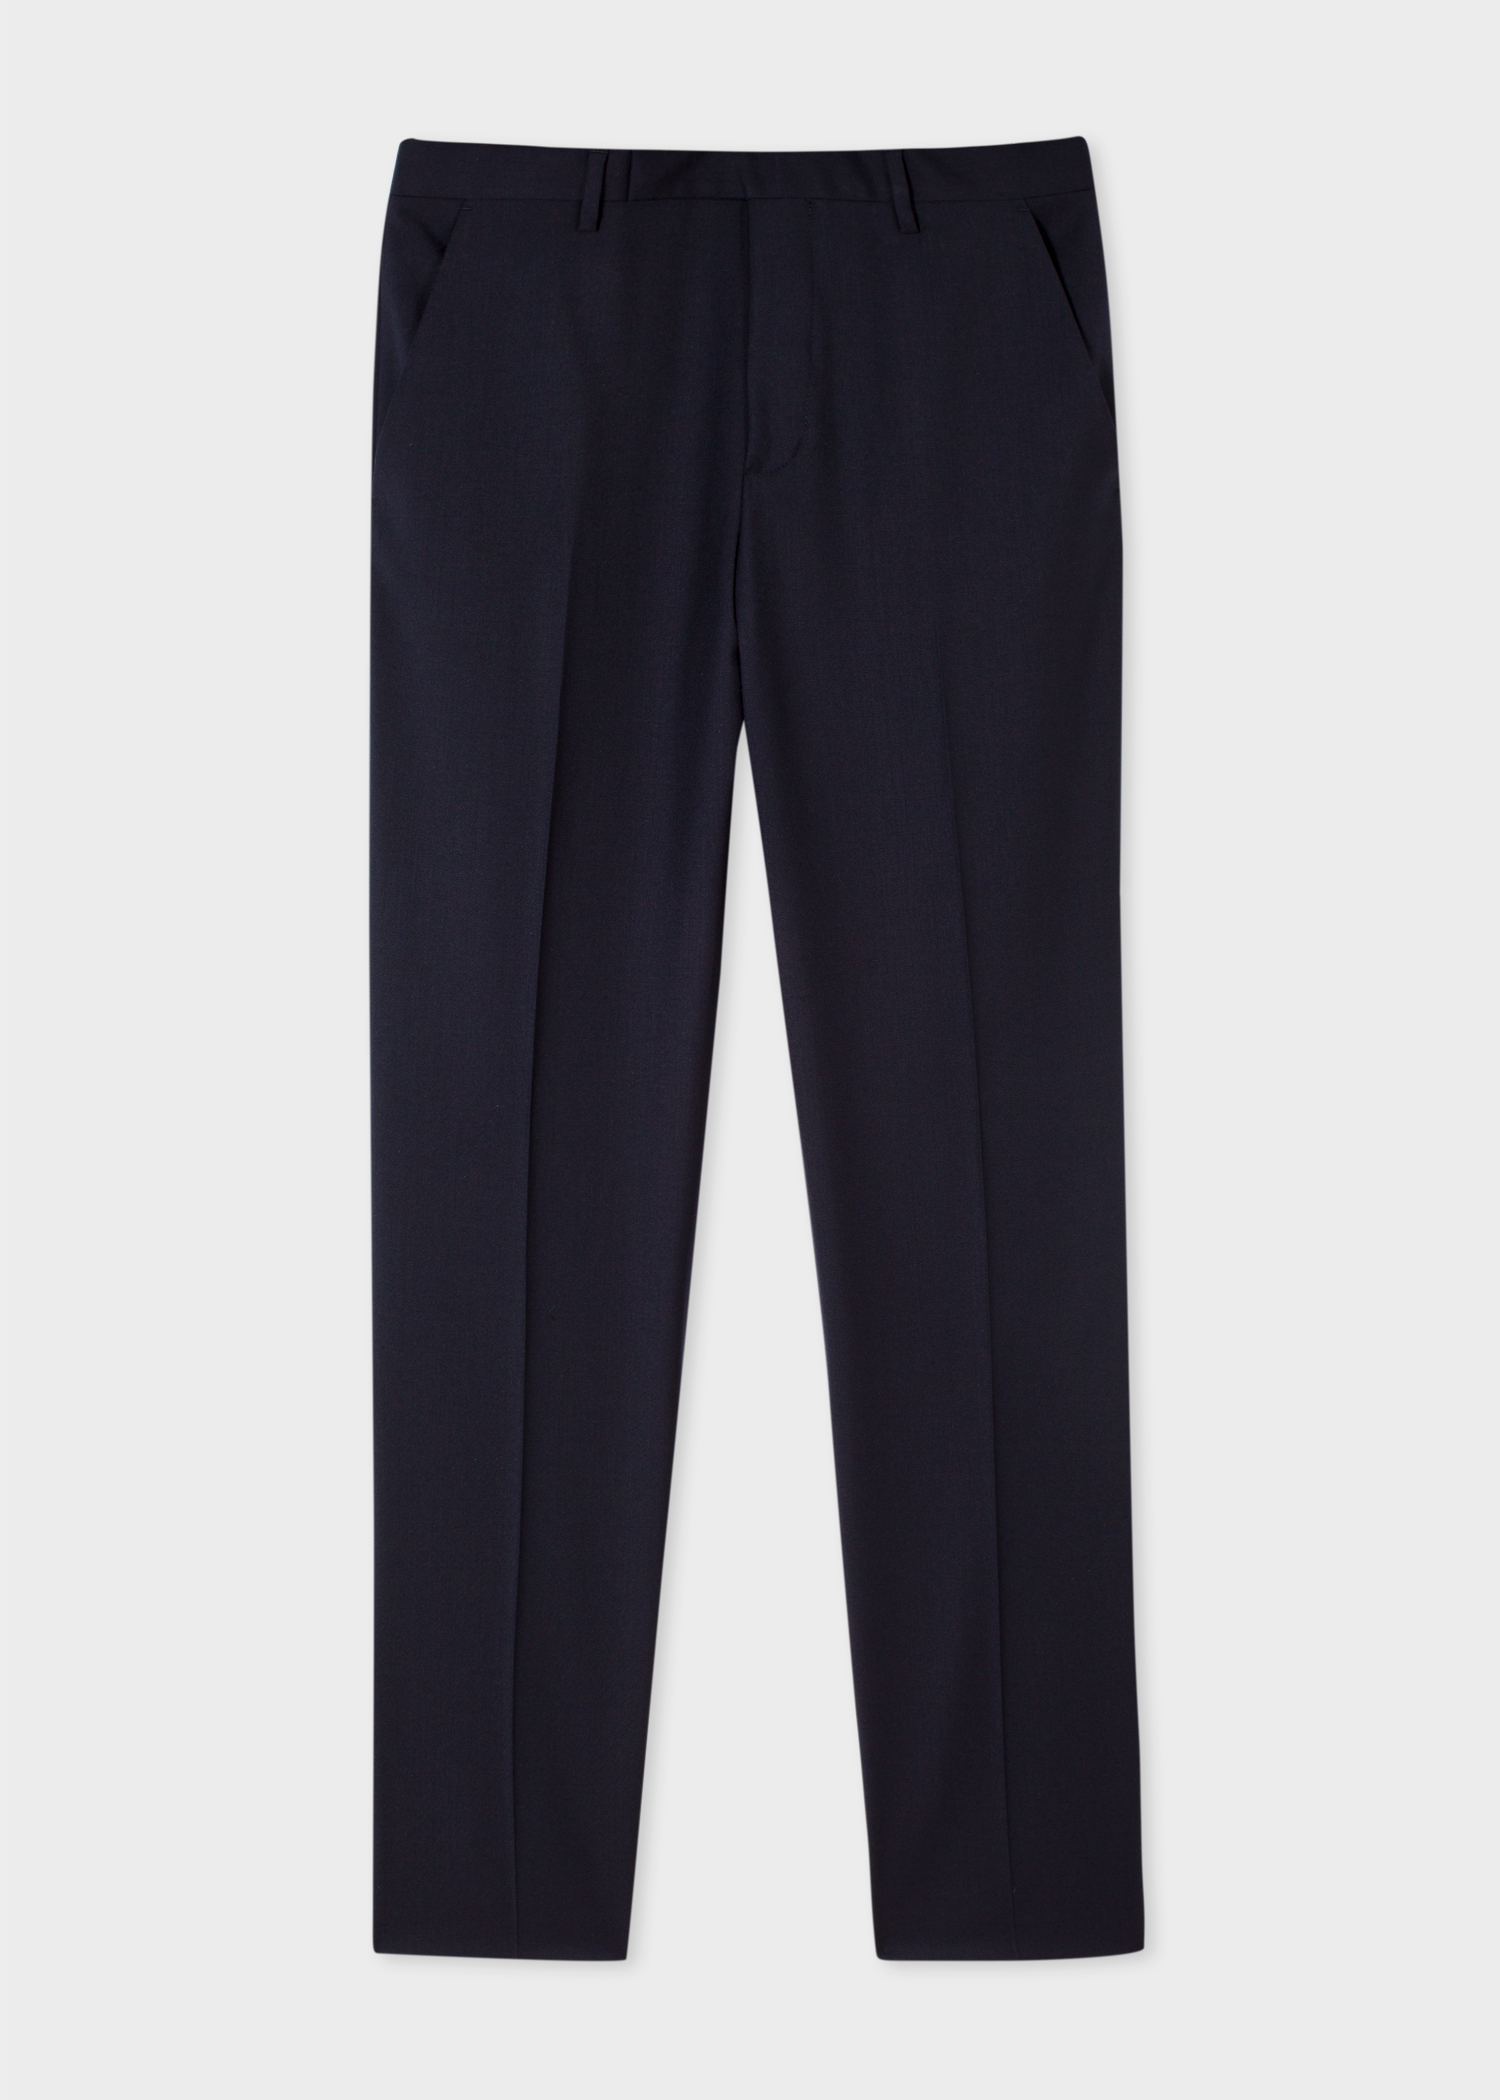 Men's Slim-Fit Navy Wool 'A Suit To Travel In' Trousers